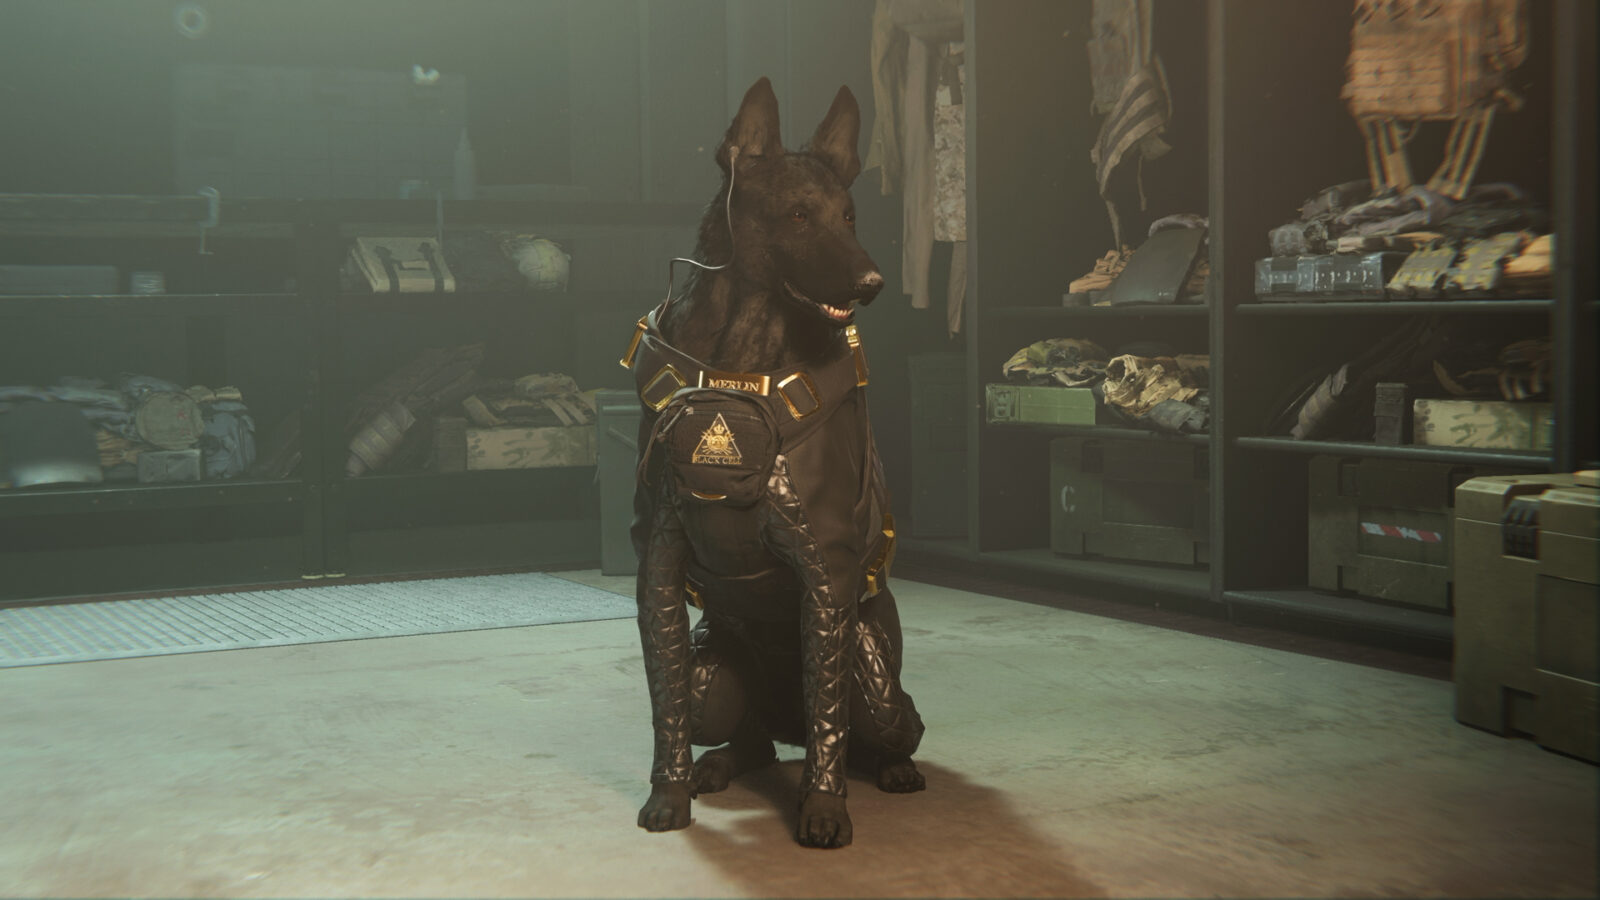 After superheroes pets are also coming to Call of Duty